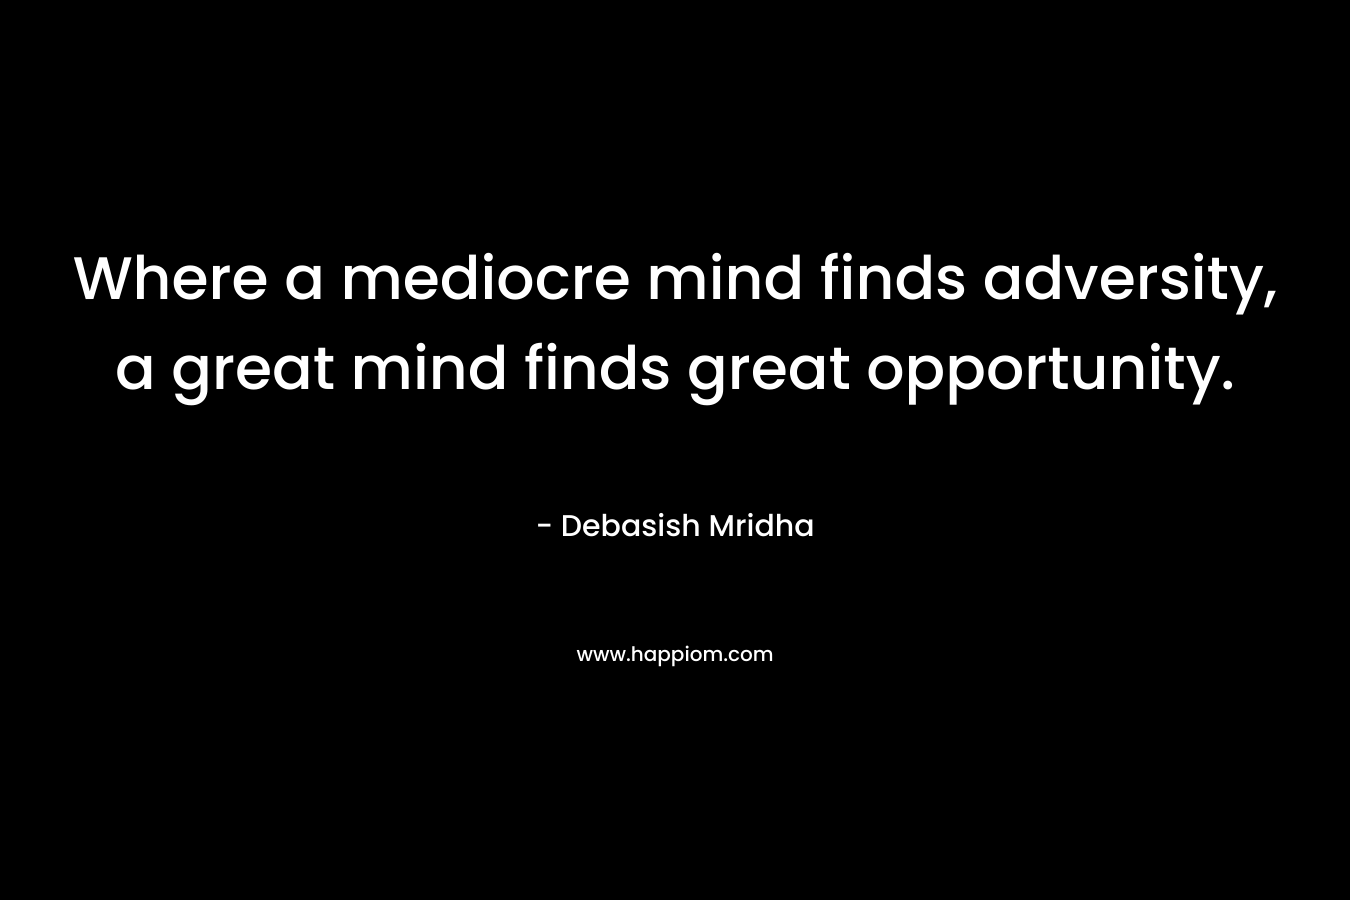 Where a mediocre mind finds adversity, a great mind finds great opportunity.